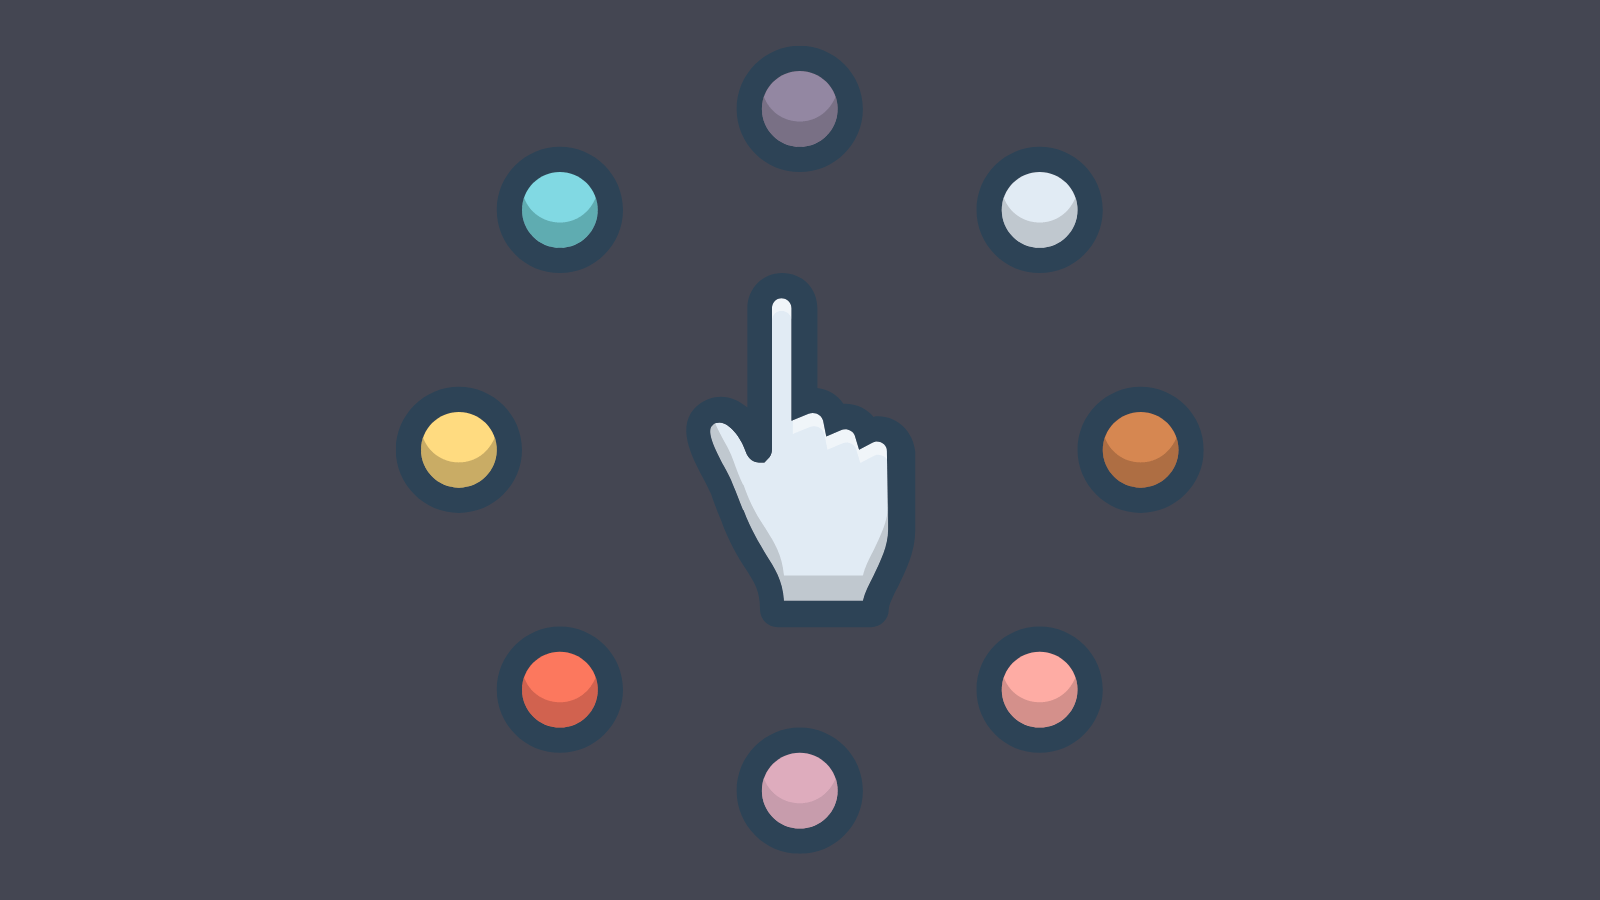 A pointer finger icon surrounded by circles of various colors